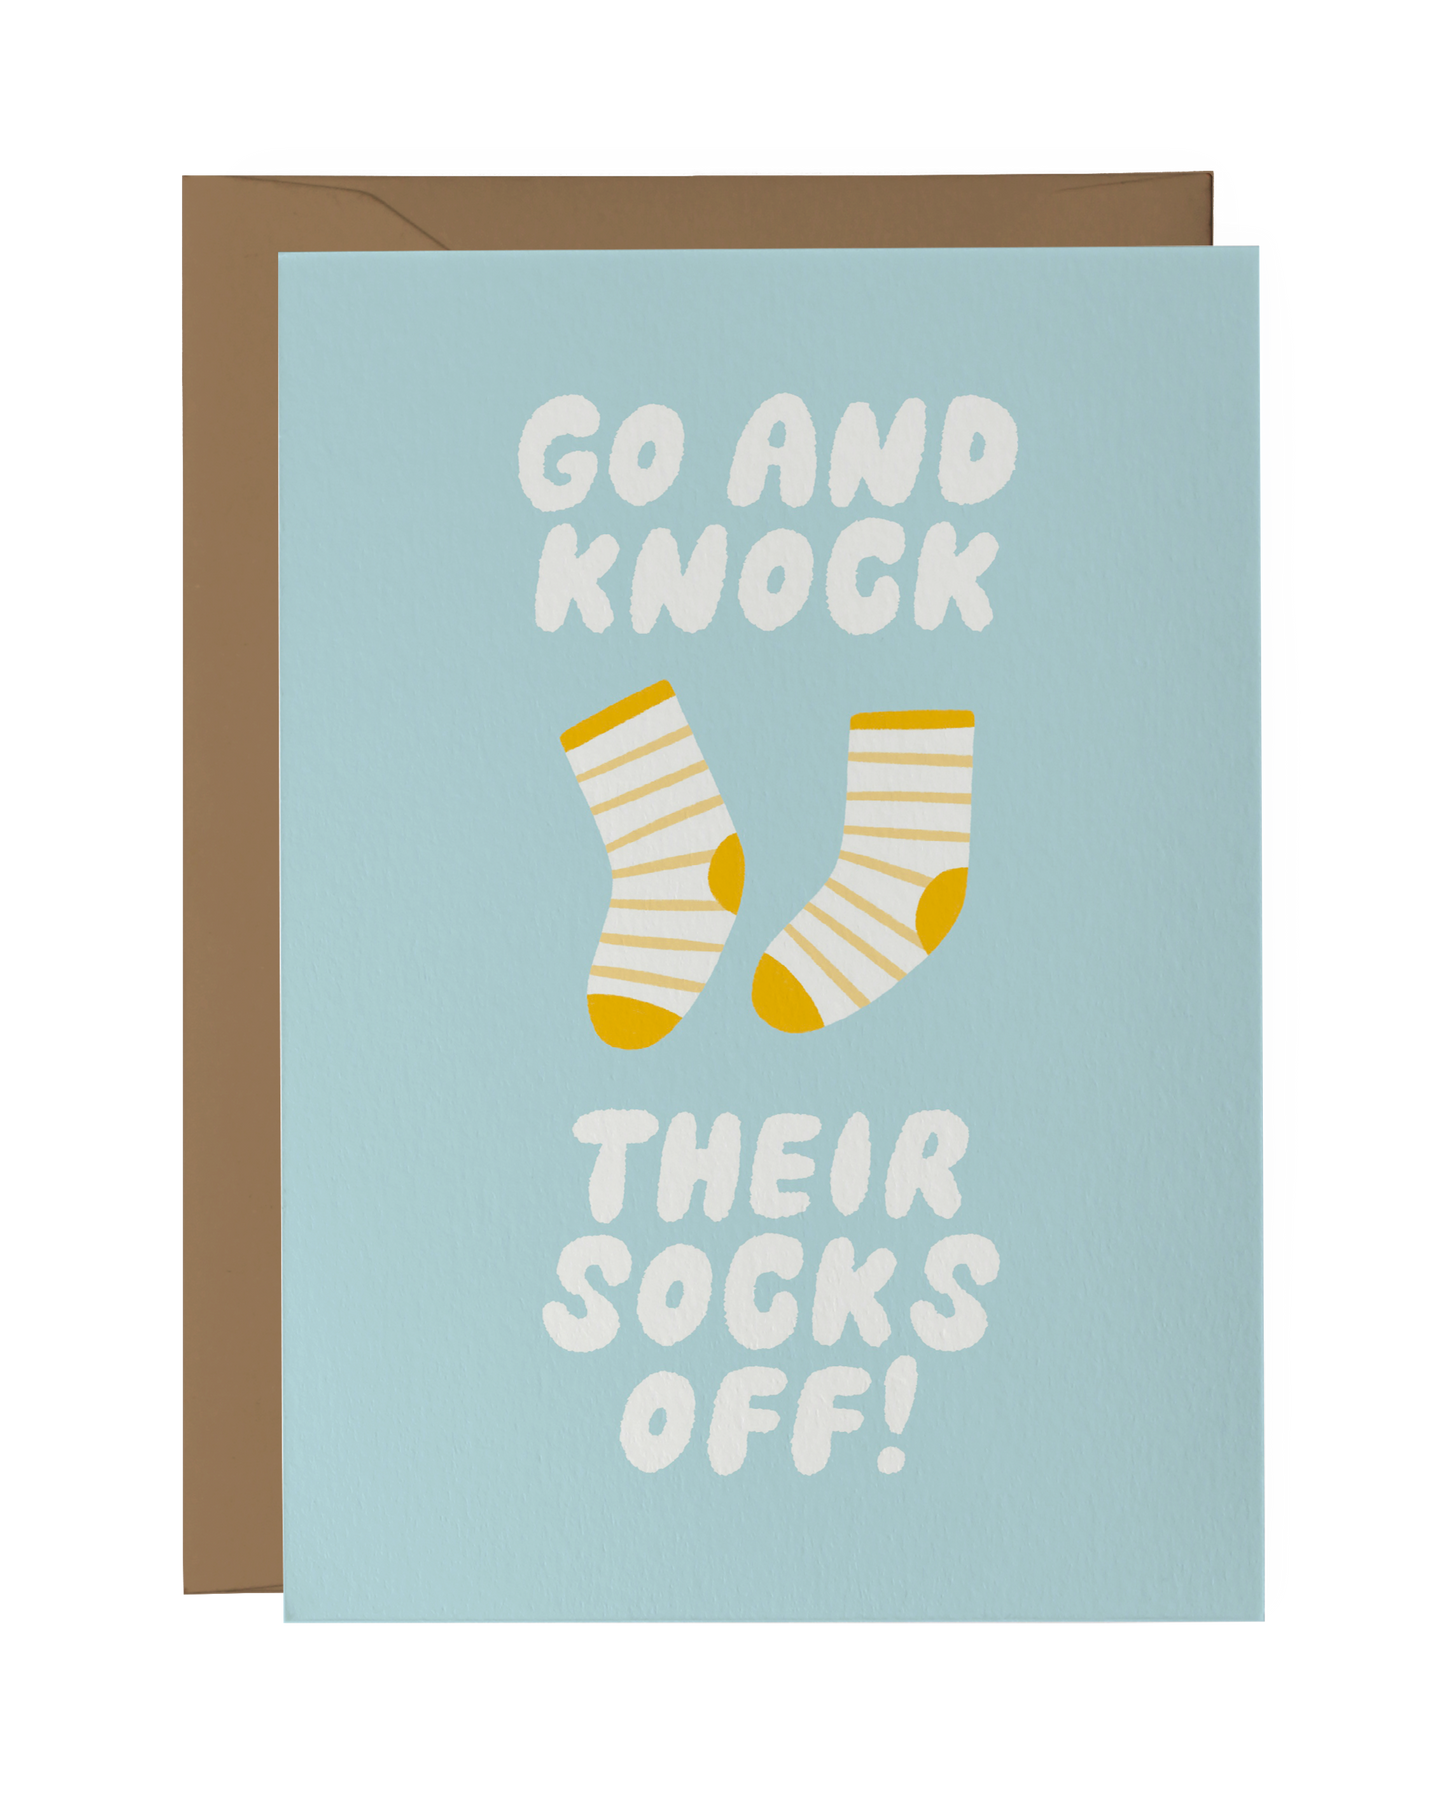 Go and Knock Their Socks Off!